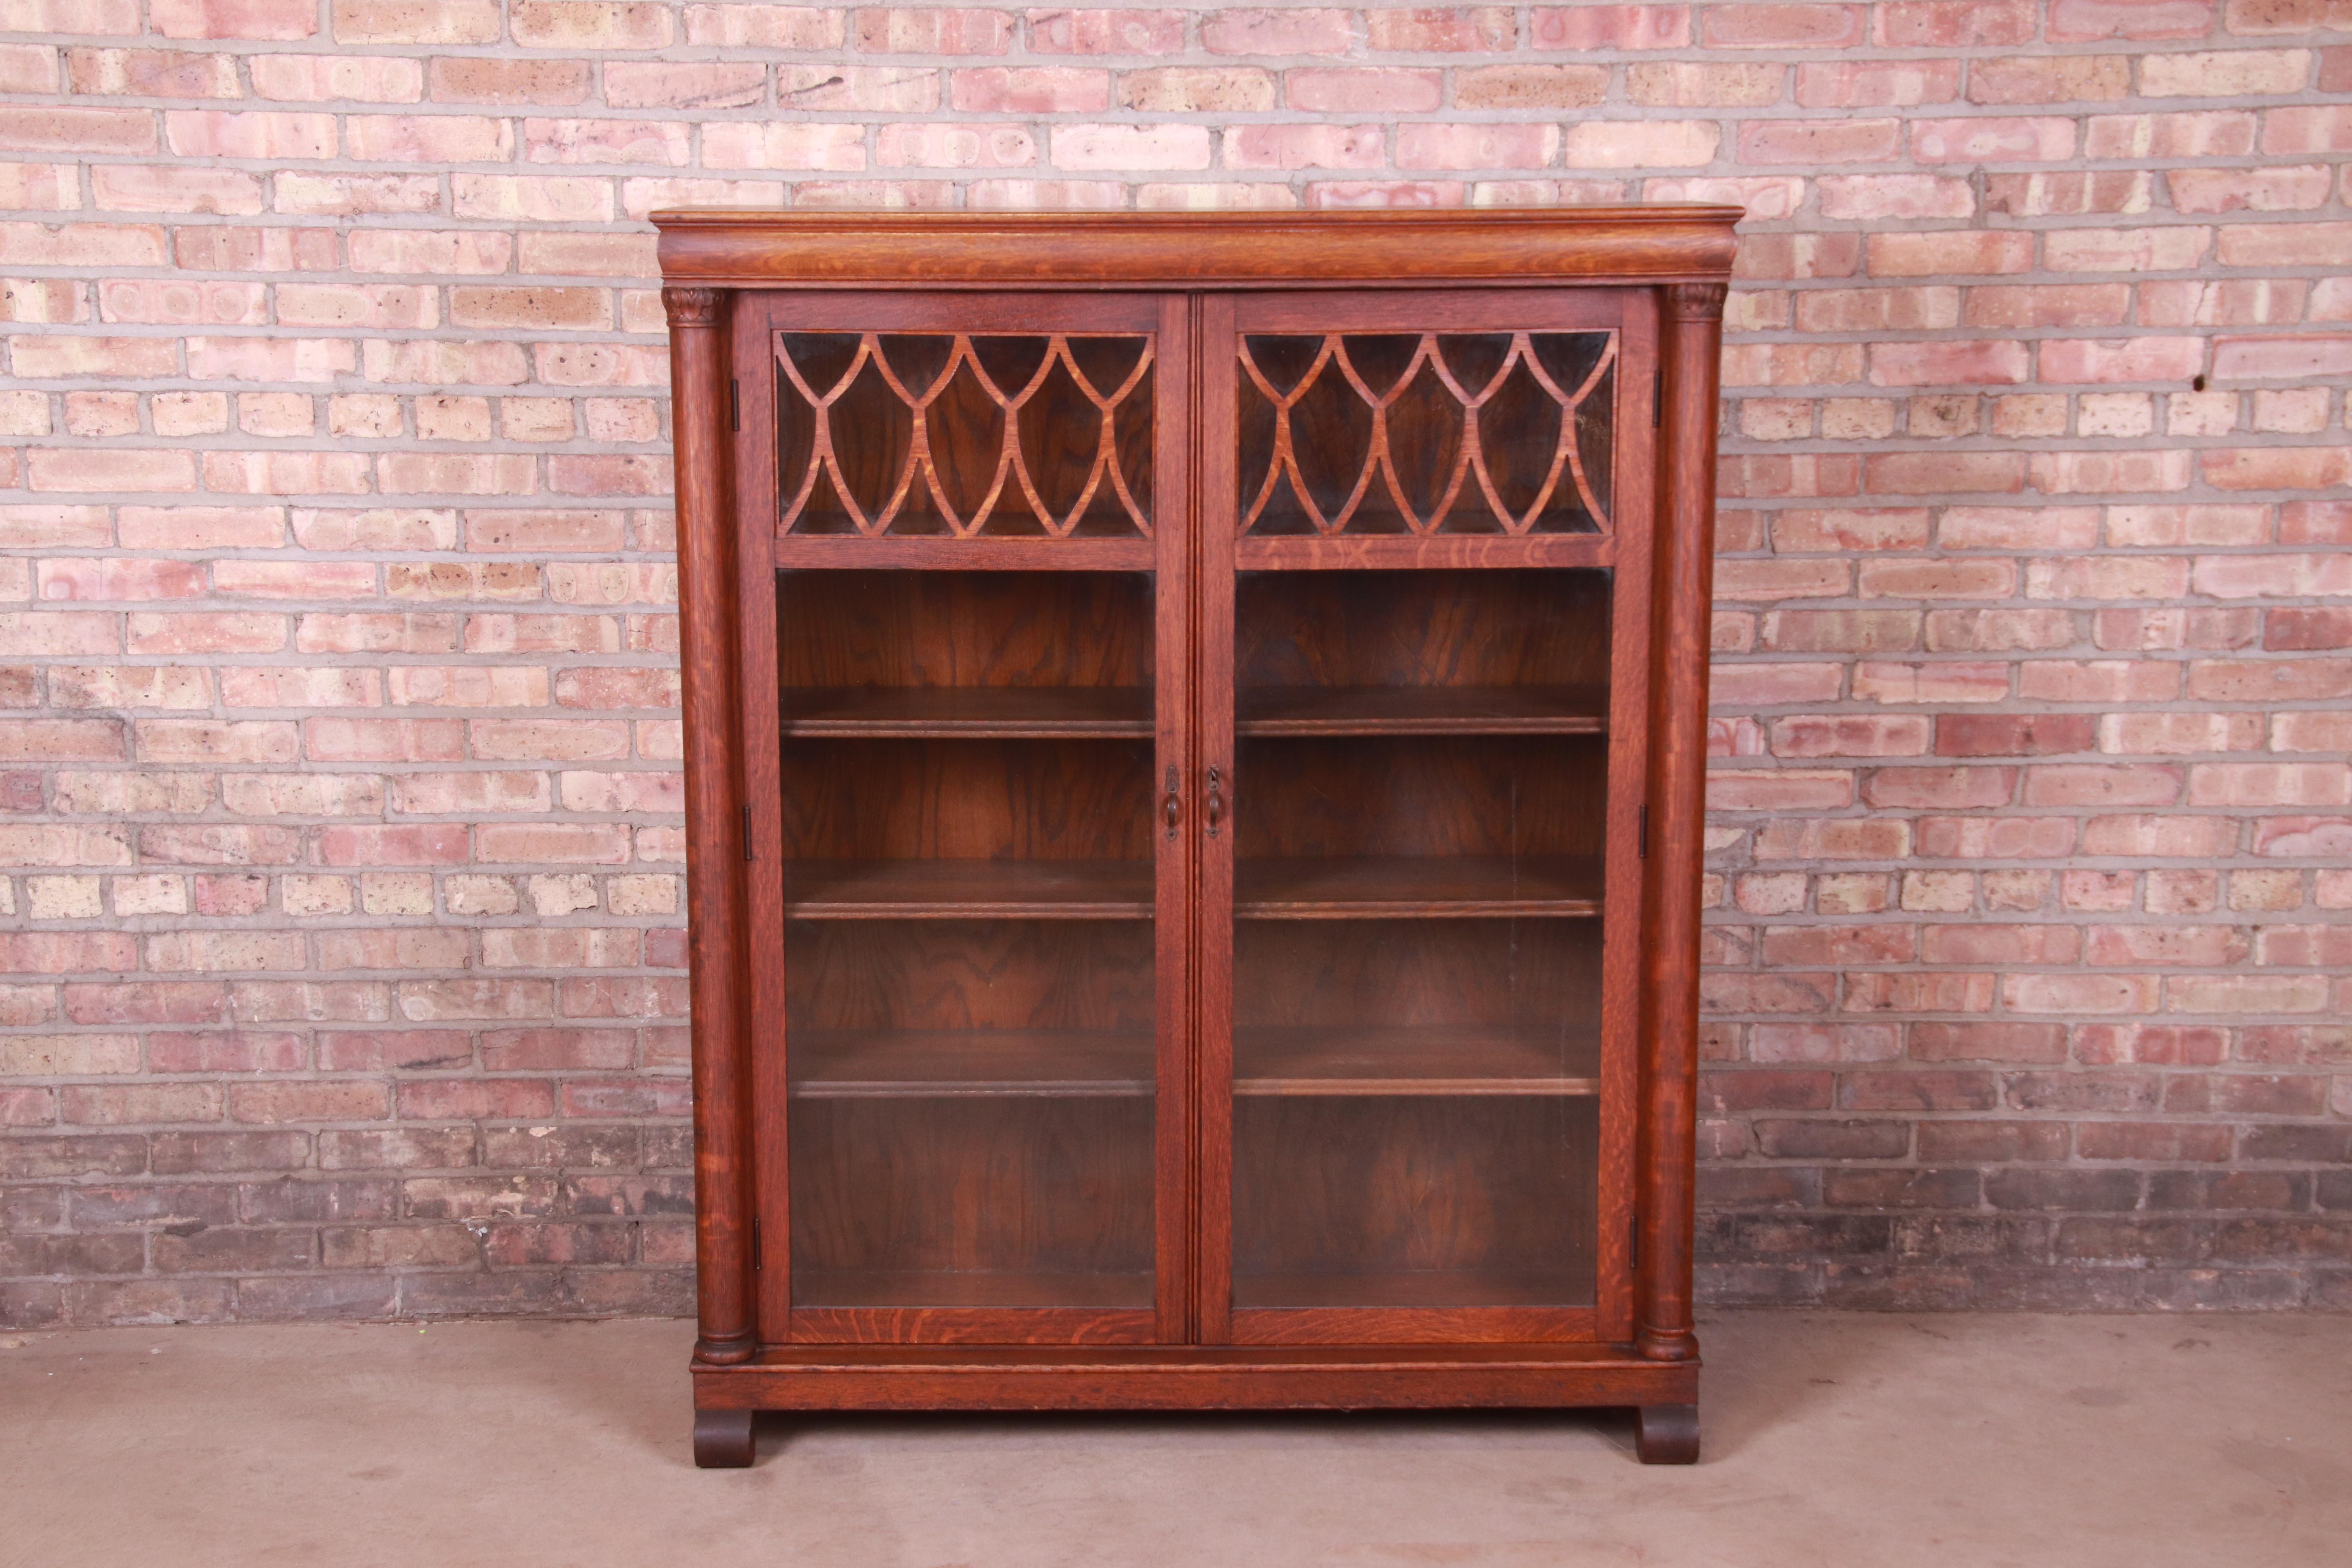 A beautiful antique Arts & Crafts double bookcase

USA, Circa 1900

Carved quarter sawn oak, with glass front doors. Cabinet locks, and key is included.

Measures: 48.25